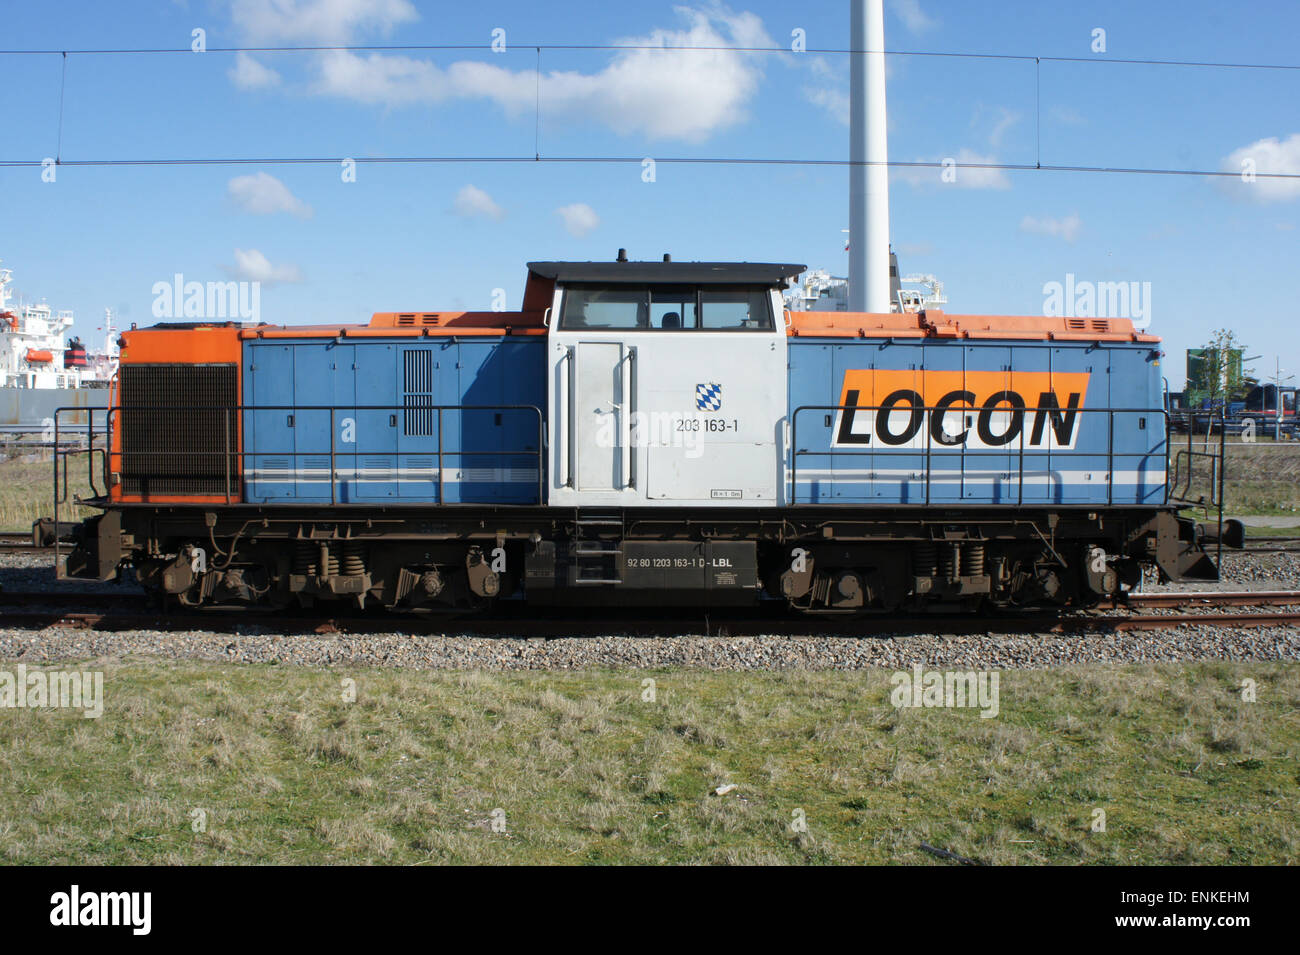 Locon 203 163-1 at the Westhaven, Port of Amsterdam, Stock Photo